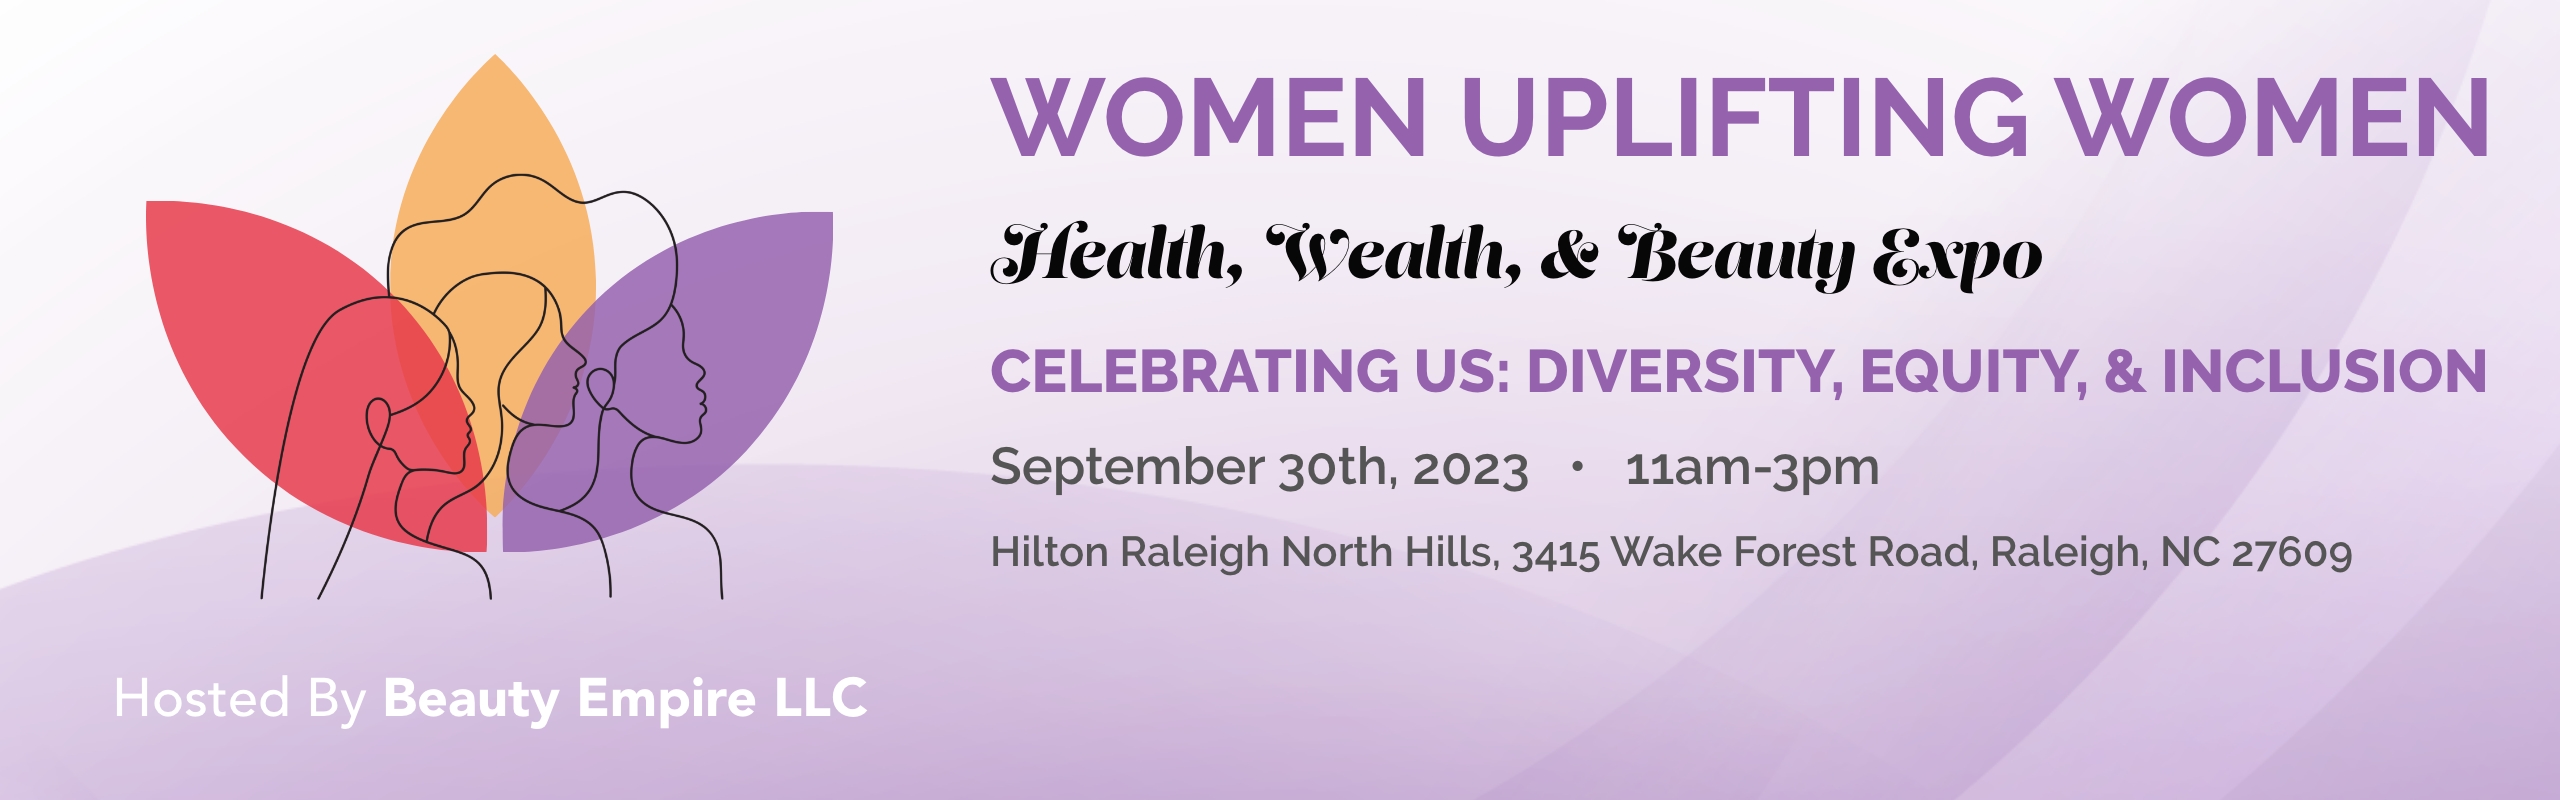 Women Uplifting Women, Health Wealth & Beauty. Celebrating Us: Diversity Equity and Inclusion. September 30, 2023 from 11 AM to 3 PM